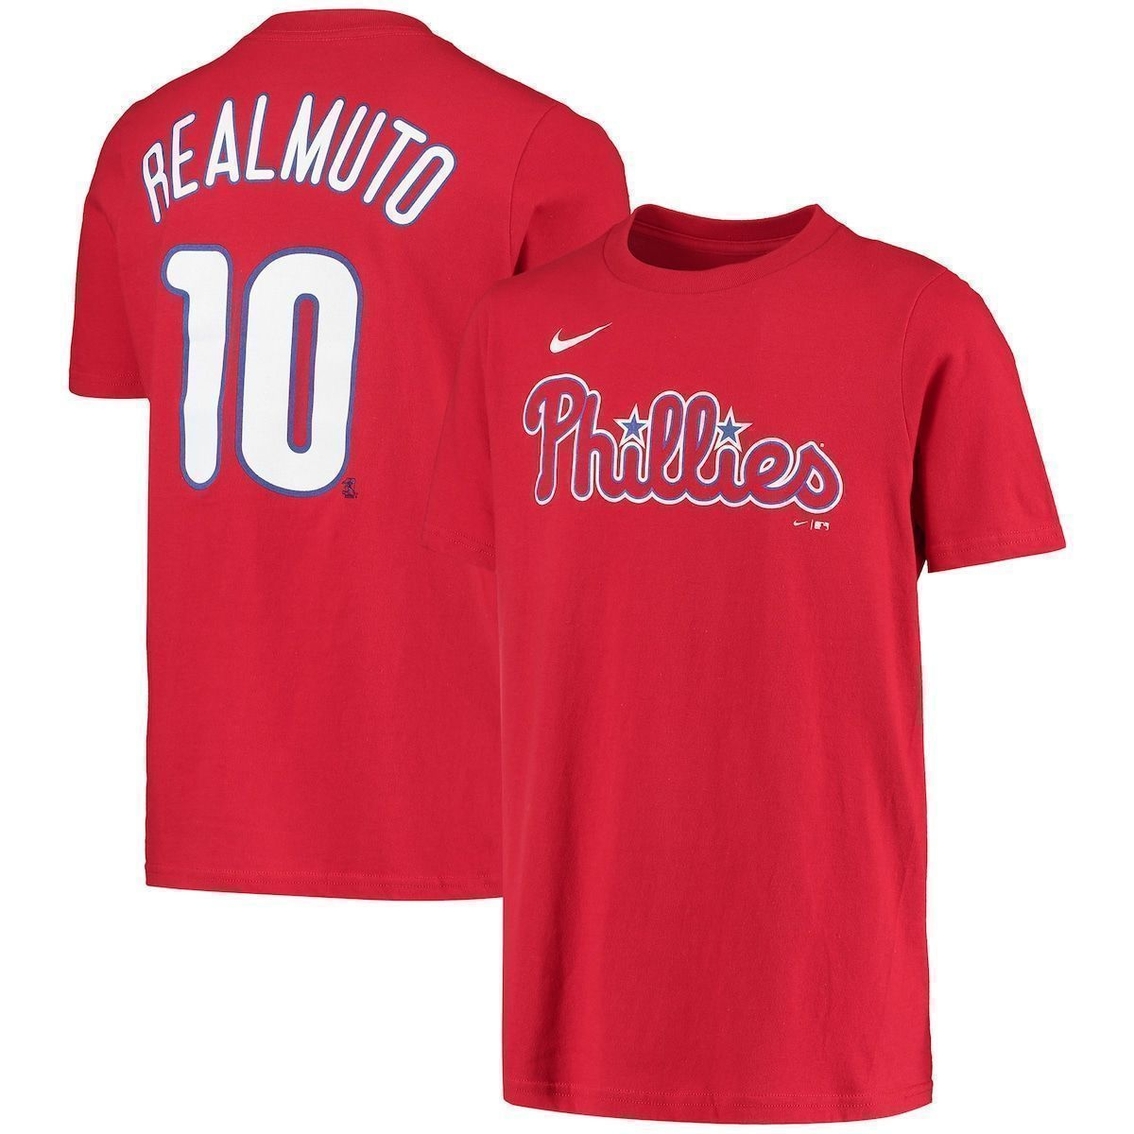 Nike Youth Jt Realmuto Red Philadelphia Phillies Name & Number T